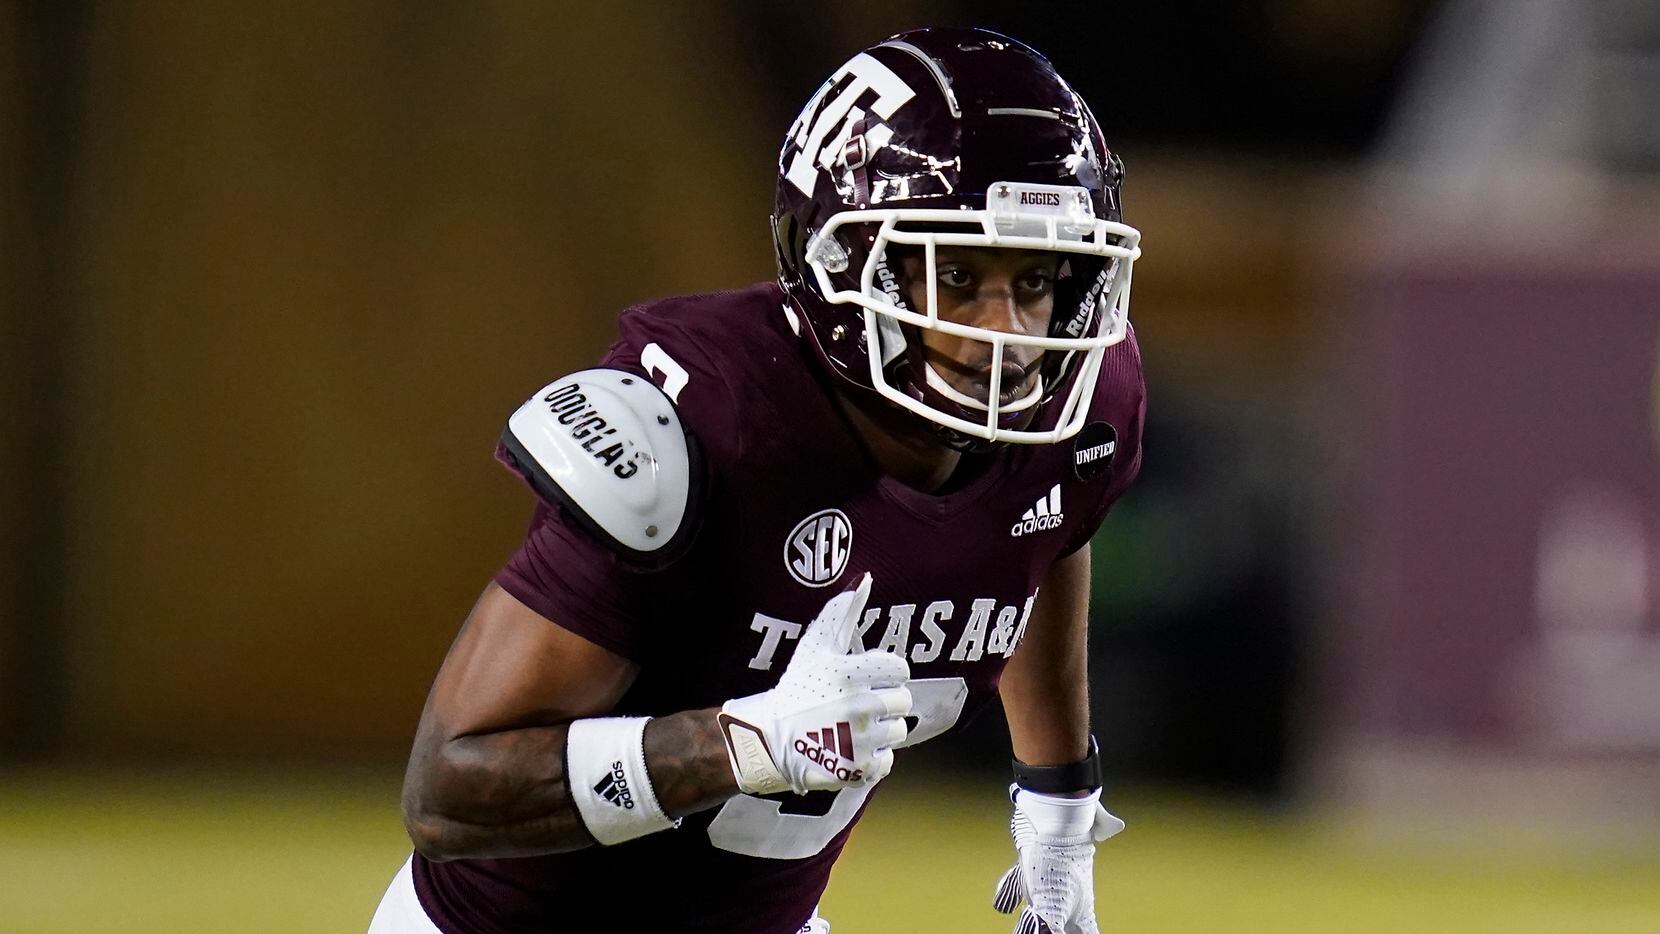 Texas A&M wide receiver Hezekiah Jones (9) runs a route against Arkansas during the second half of an NCAA college football game, Saturday, Oct. 31, 2020, in College Station, Texas.